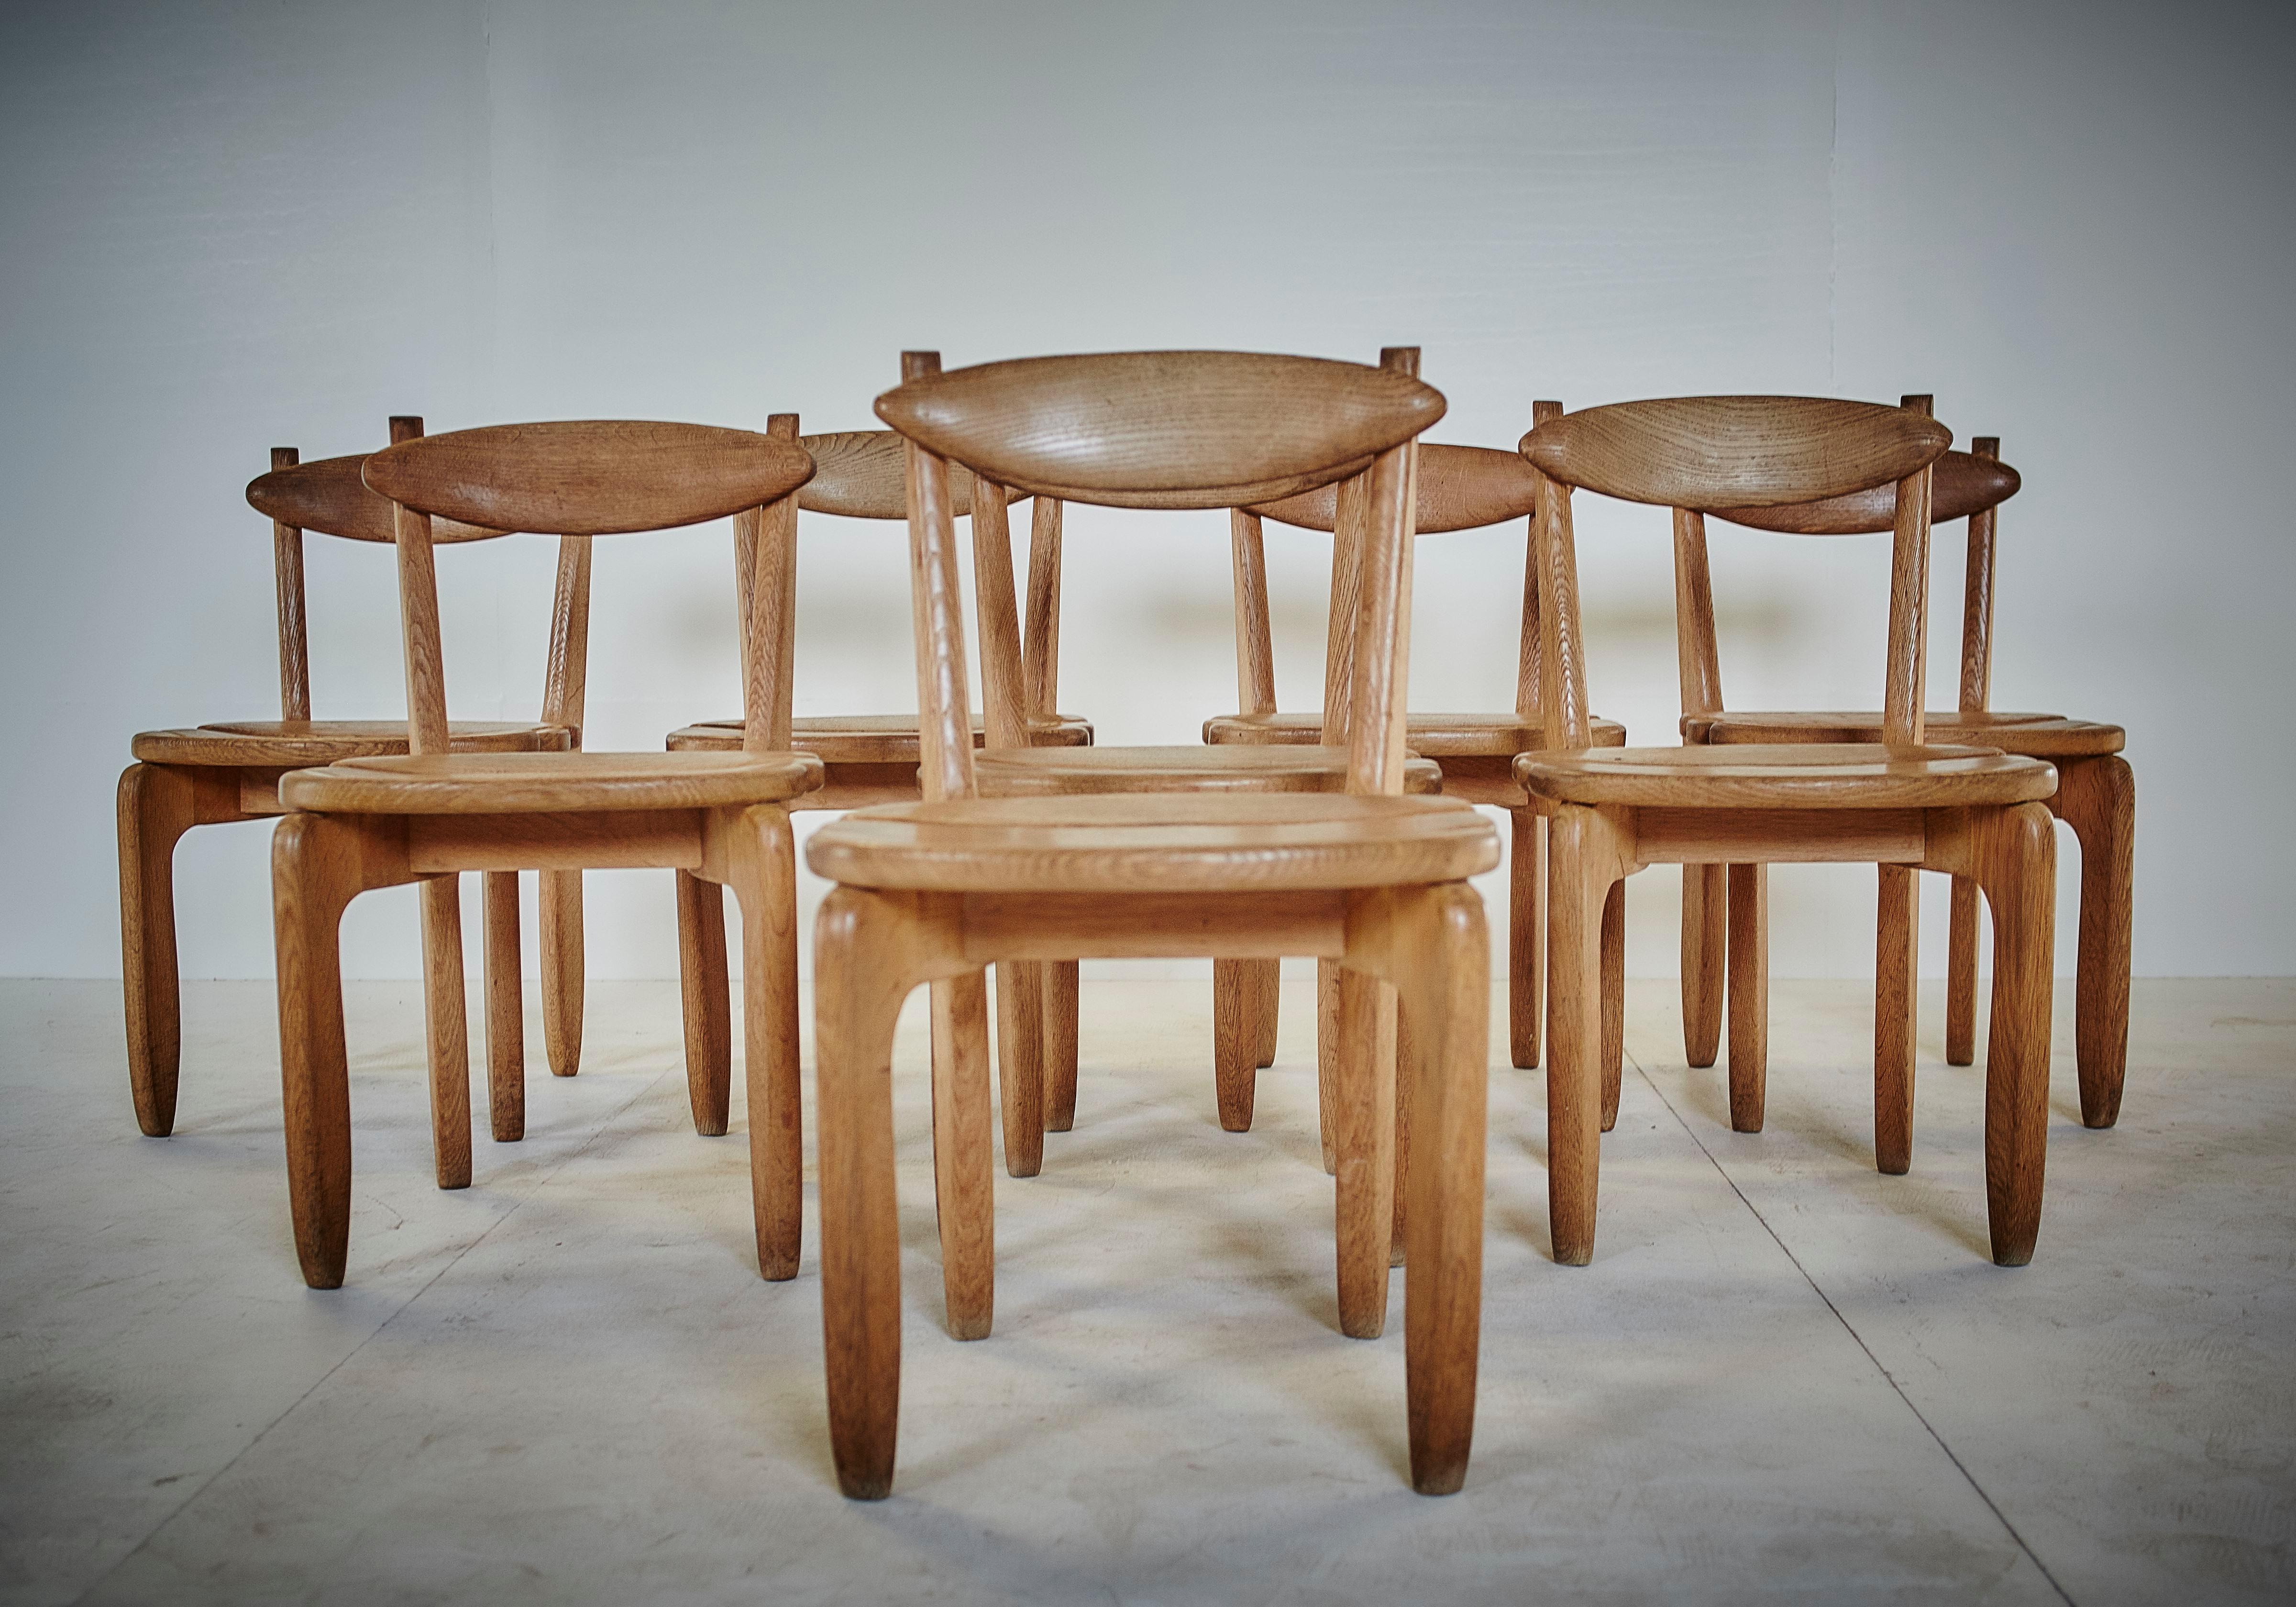 Robert Guillerme (1913 - 1990) and Jacques Chambron (1914 - 2001).
Set of eight dining chairs model 